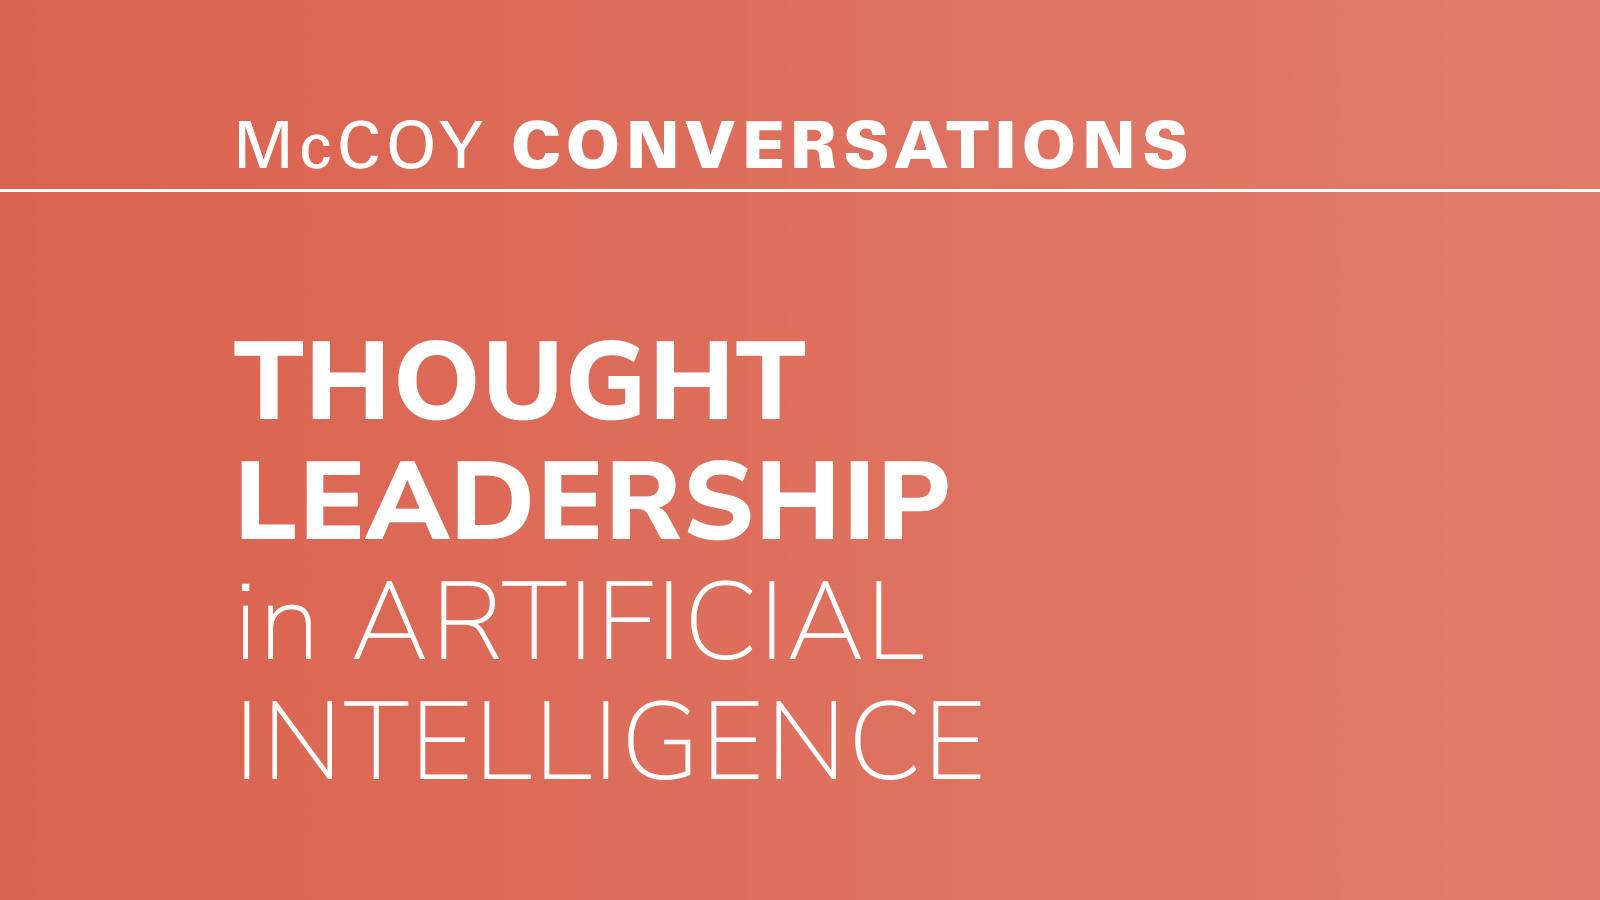 Peach colored graphic with white text that reads, "McCoy Conversations. Thought Leadership in Artificial Intelligence."